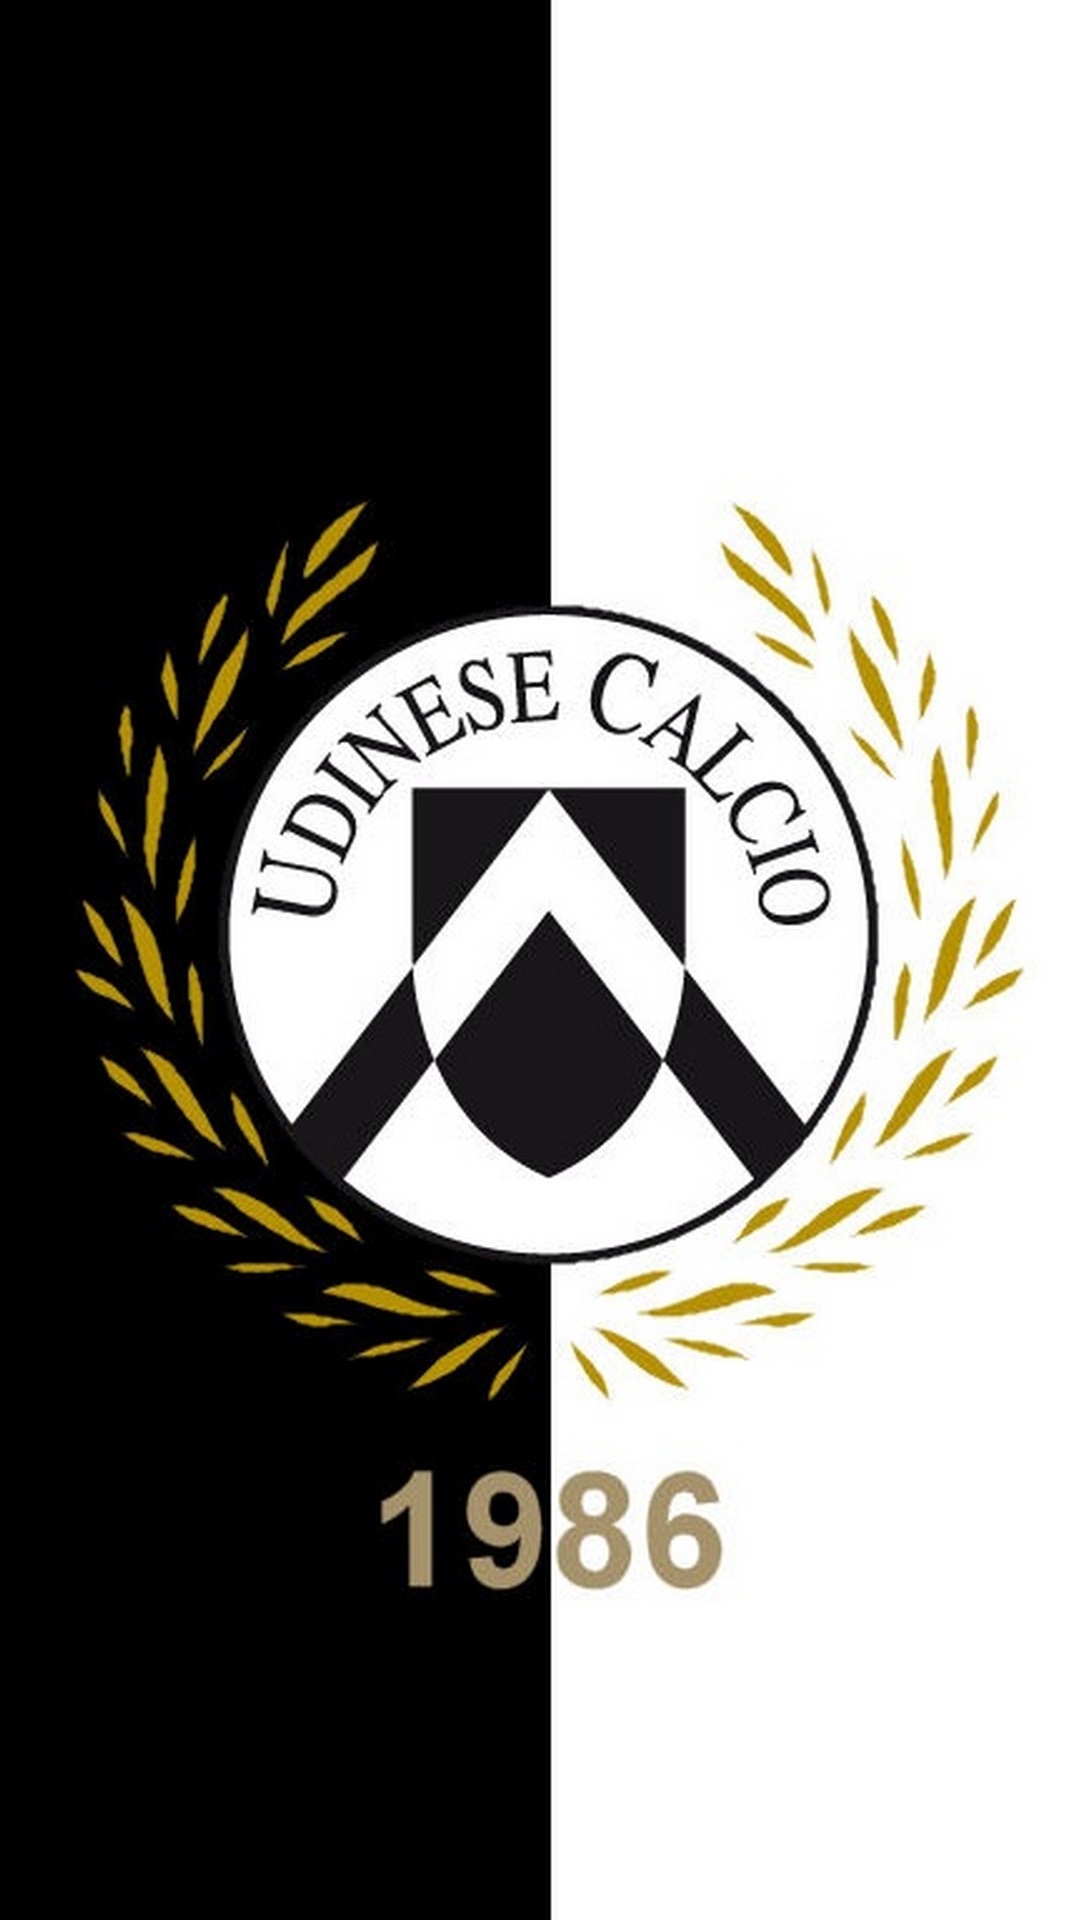 Unidese Calcio iPhone Wallpapers with high-resolution 1080x1920 pixel. You can use this wallpaper for your Desktop Computers, Mac Screensavers, Windows Backgrounds, iPhone Wallpapers, Tablet or Android Lock screen and another Mobile device